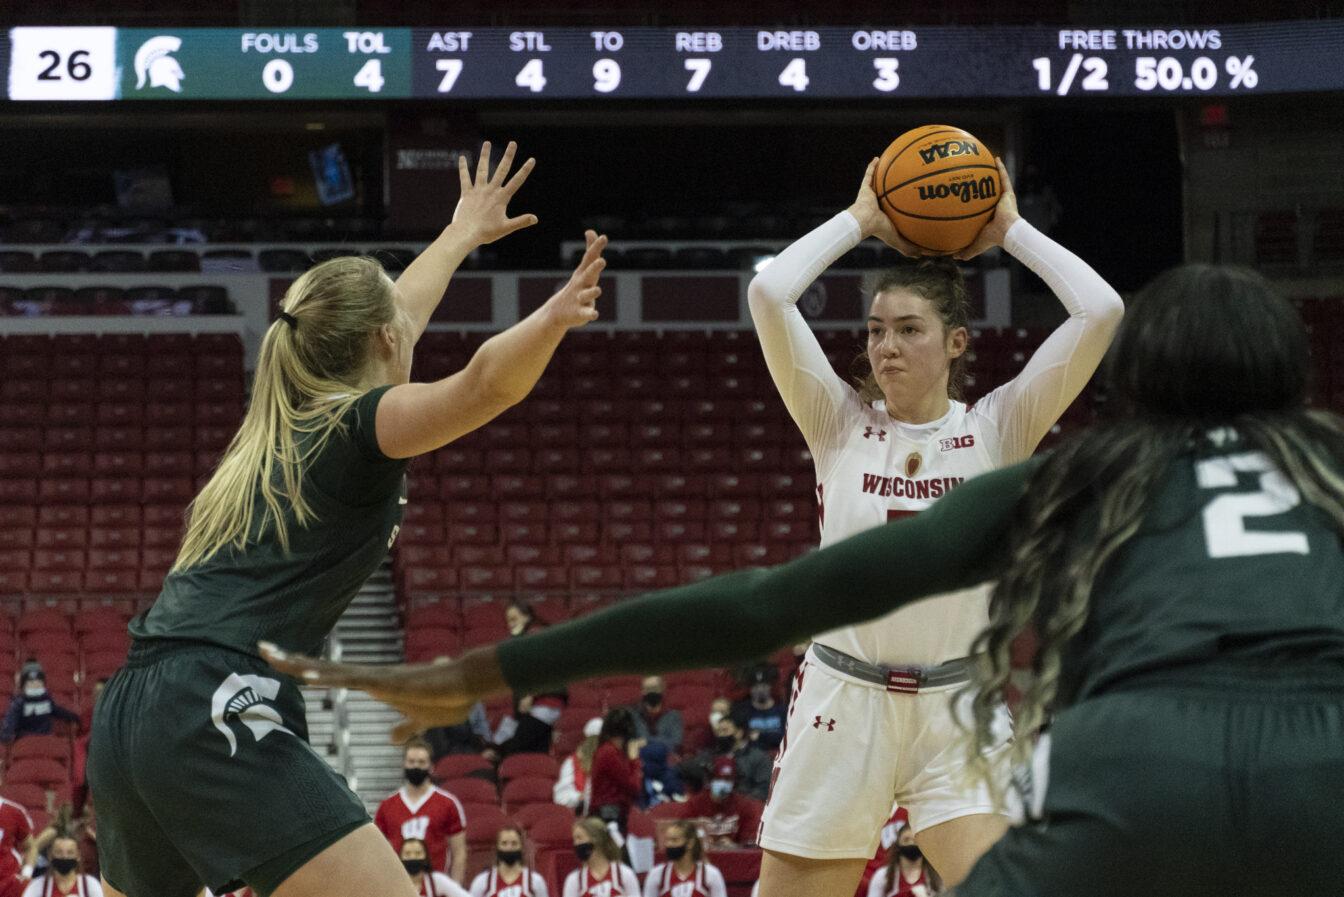 Women’s Basketball: Badgers earn No. 10 seed in Big Ten tournament, play Purdue in round one